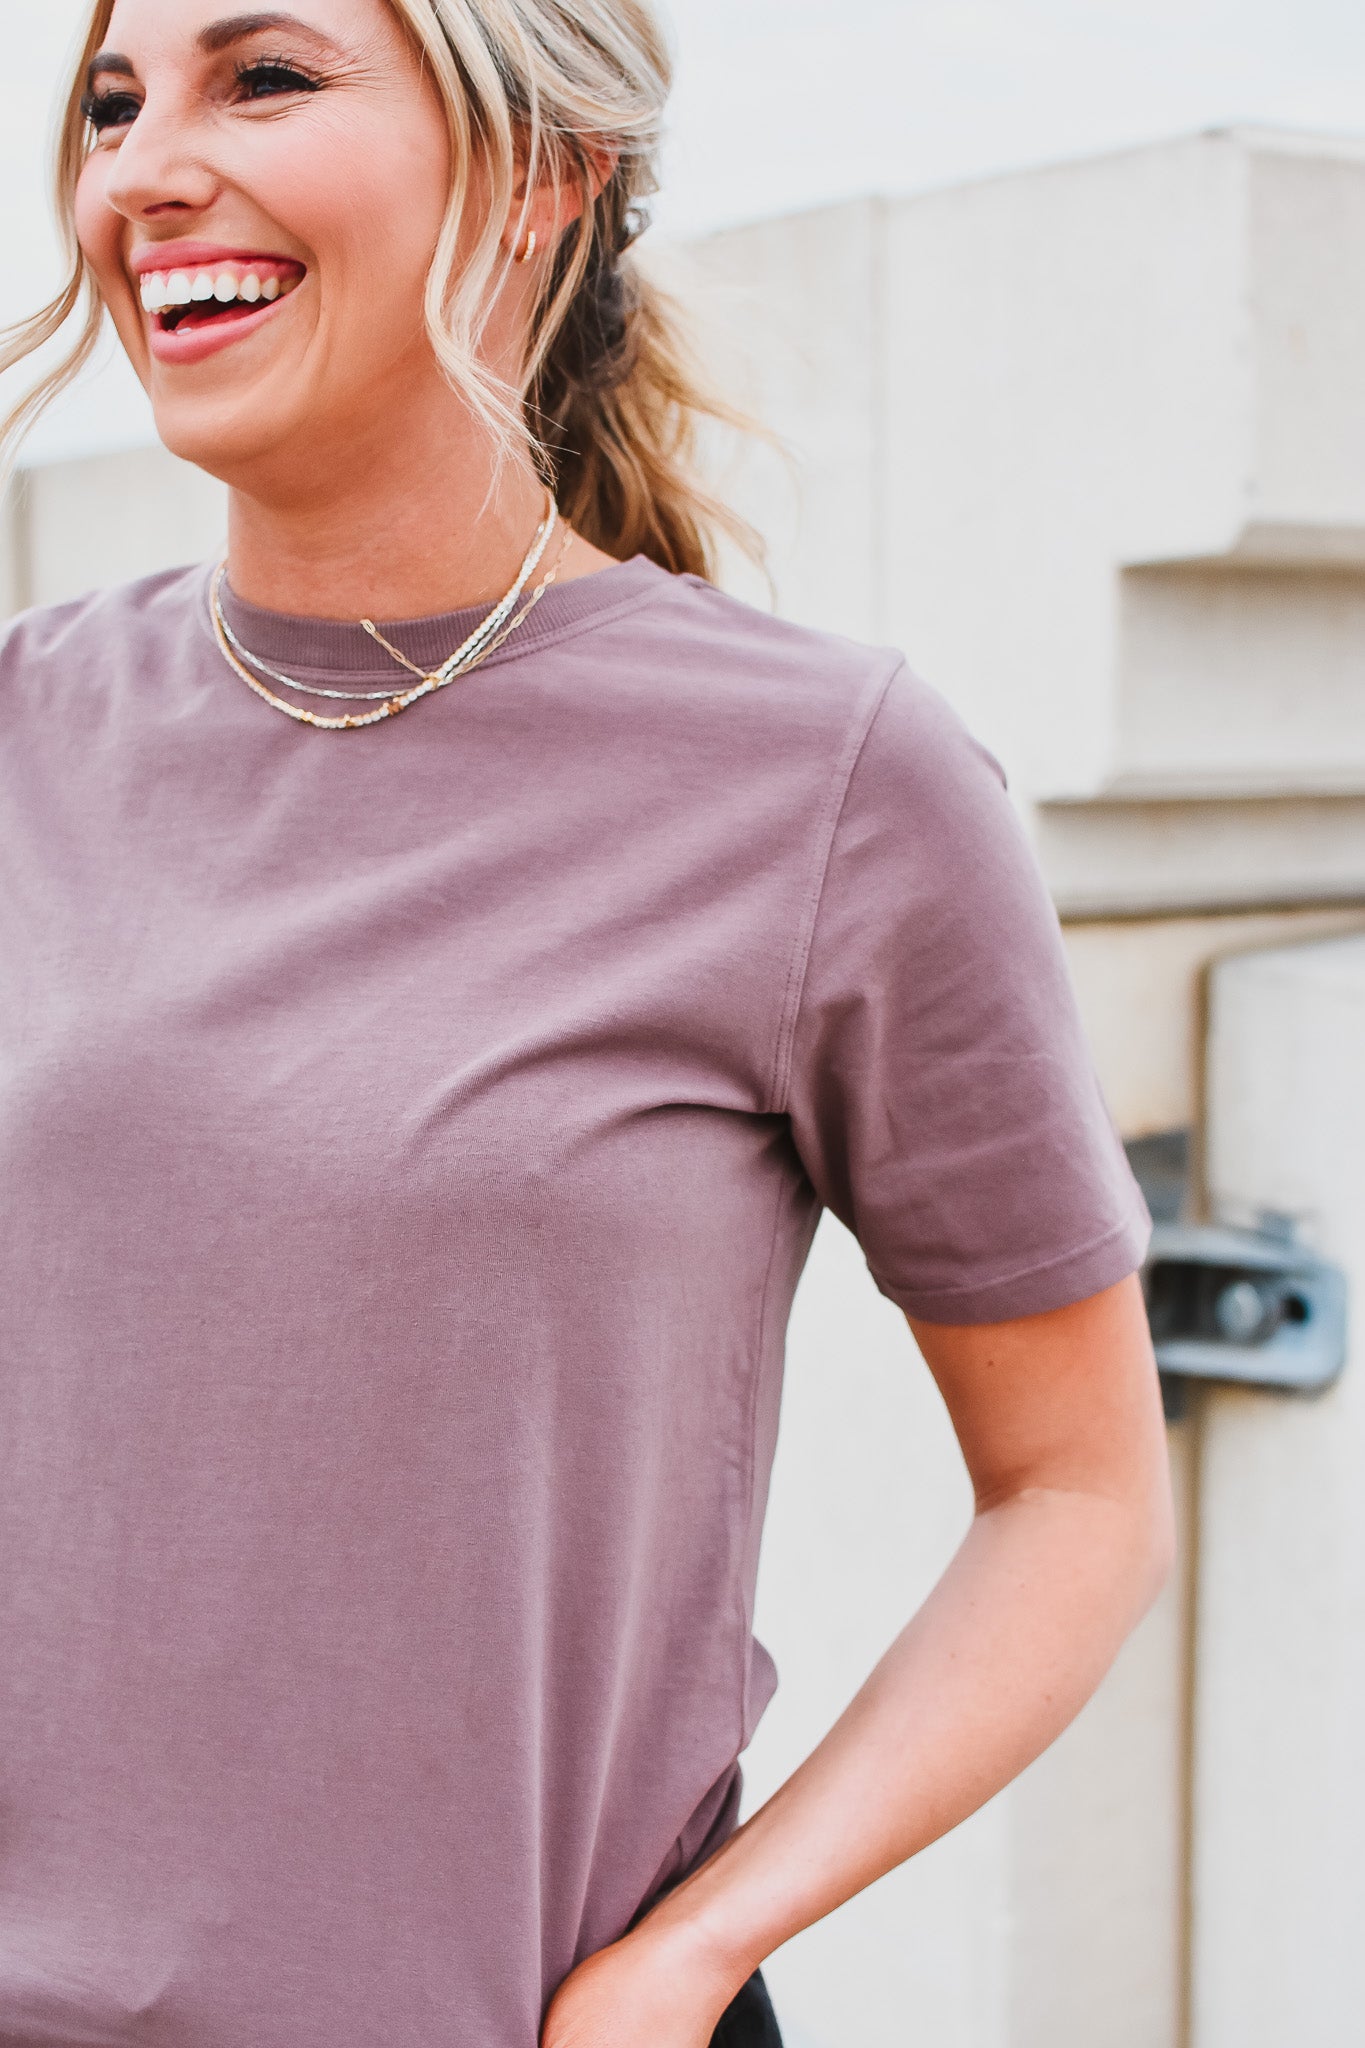 Kate Classic Boxy Fit Tee in Mocha - RESTOCK